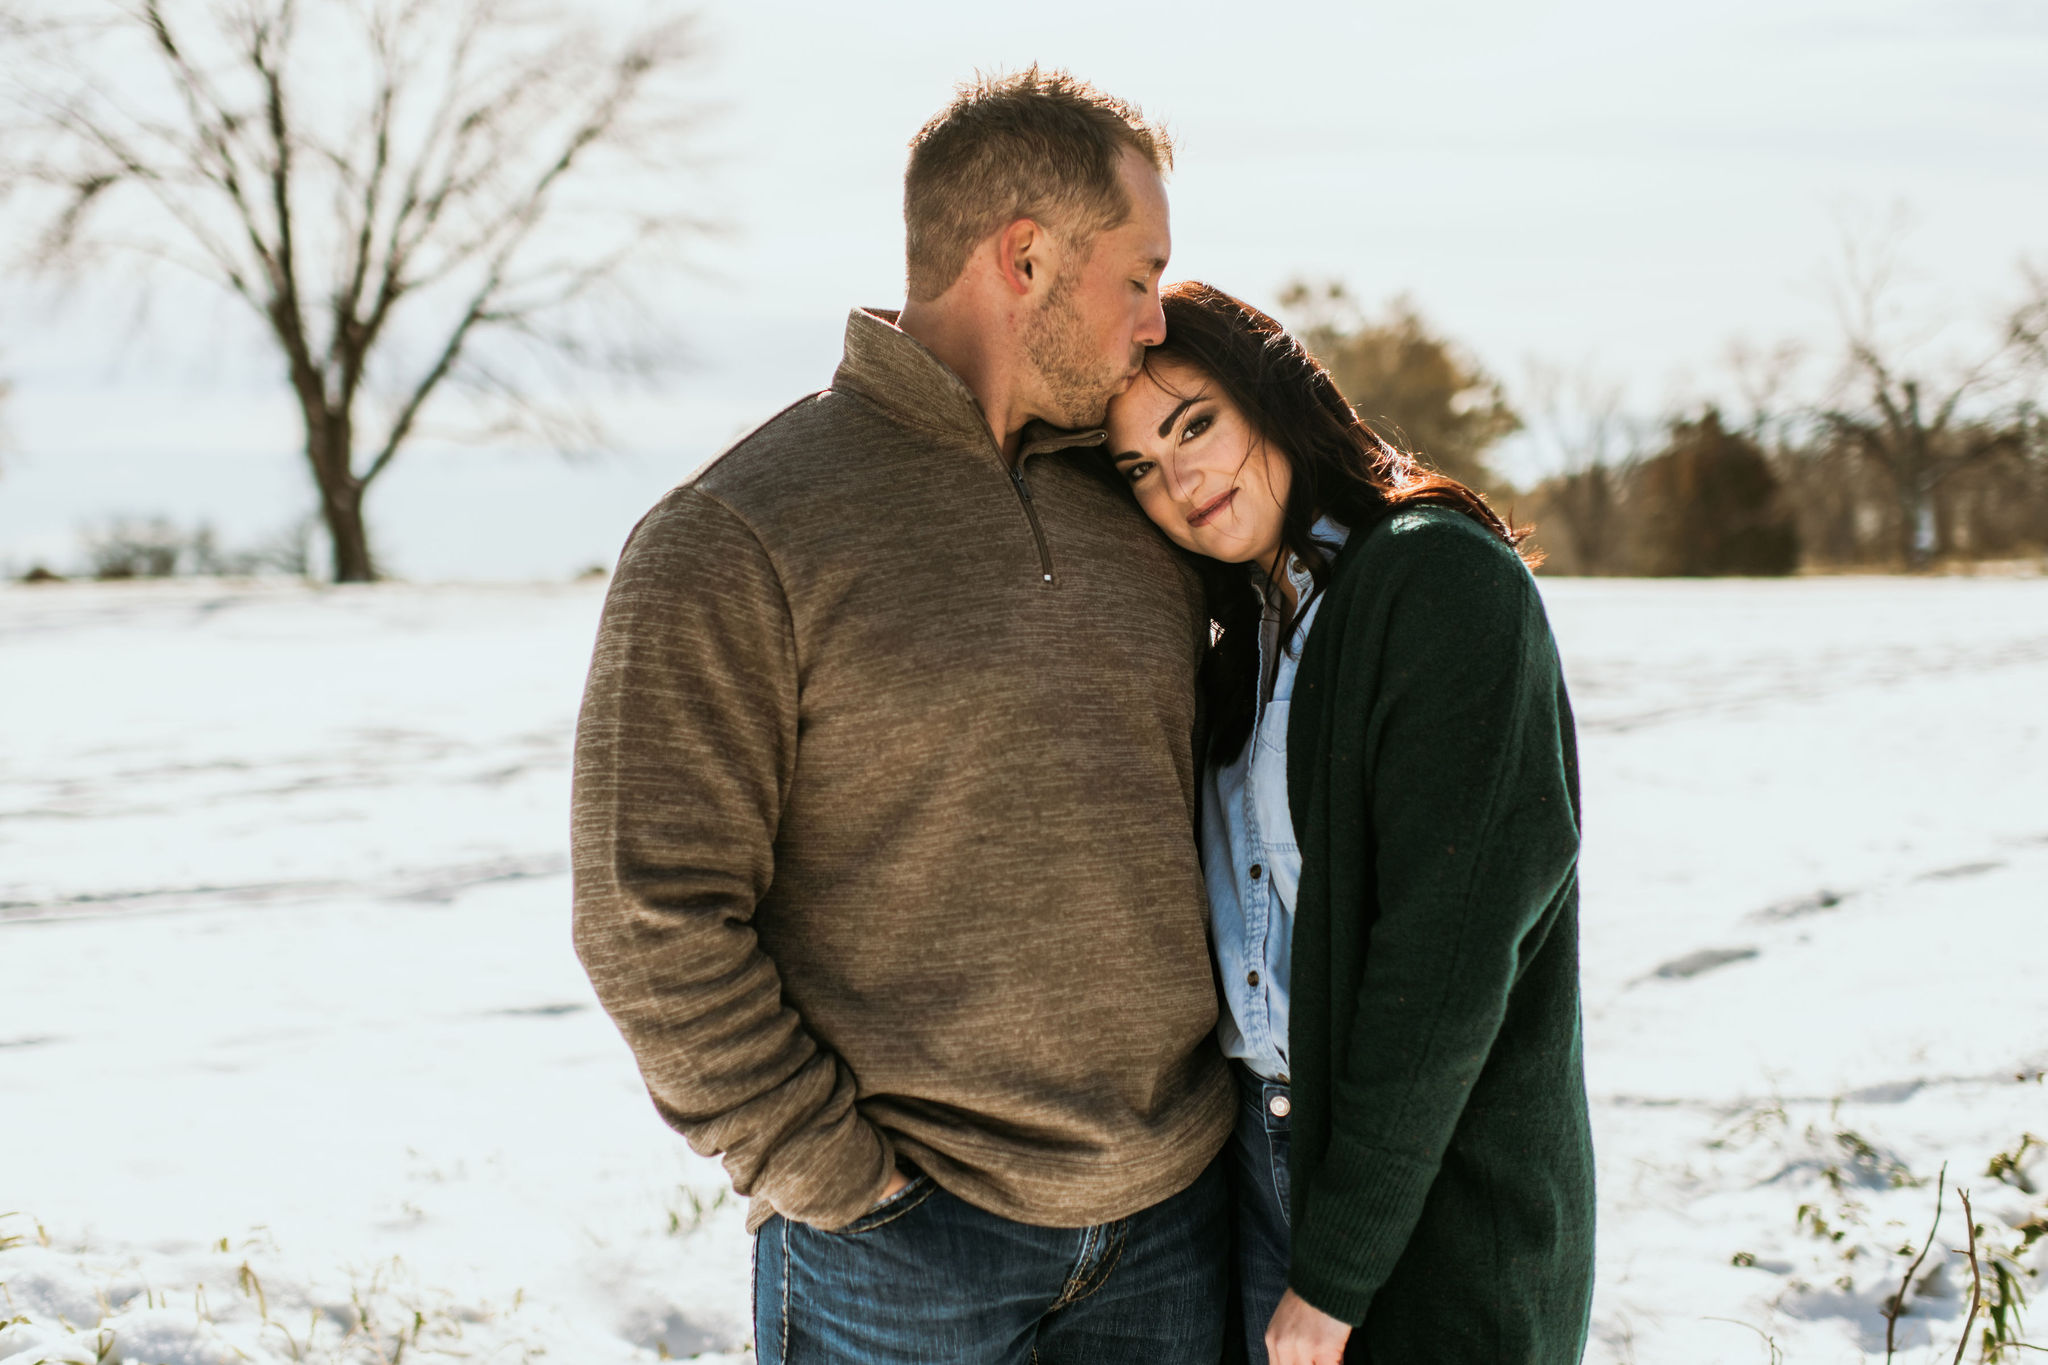 Peoria Heights, Donovan Park, Peoria, Illinois Engagement session, Photographs by Teresa, Illinois wedding and engagement session. This blog post includes outfit ideas for a winter and fall outdoor couples session and posing inspiration. Book your Illinois couples session and browse the blog for inspiration #engagement #photography #engagementphotography #illinoisphotographer